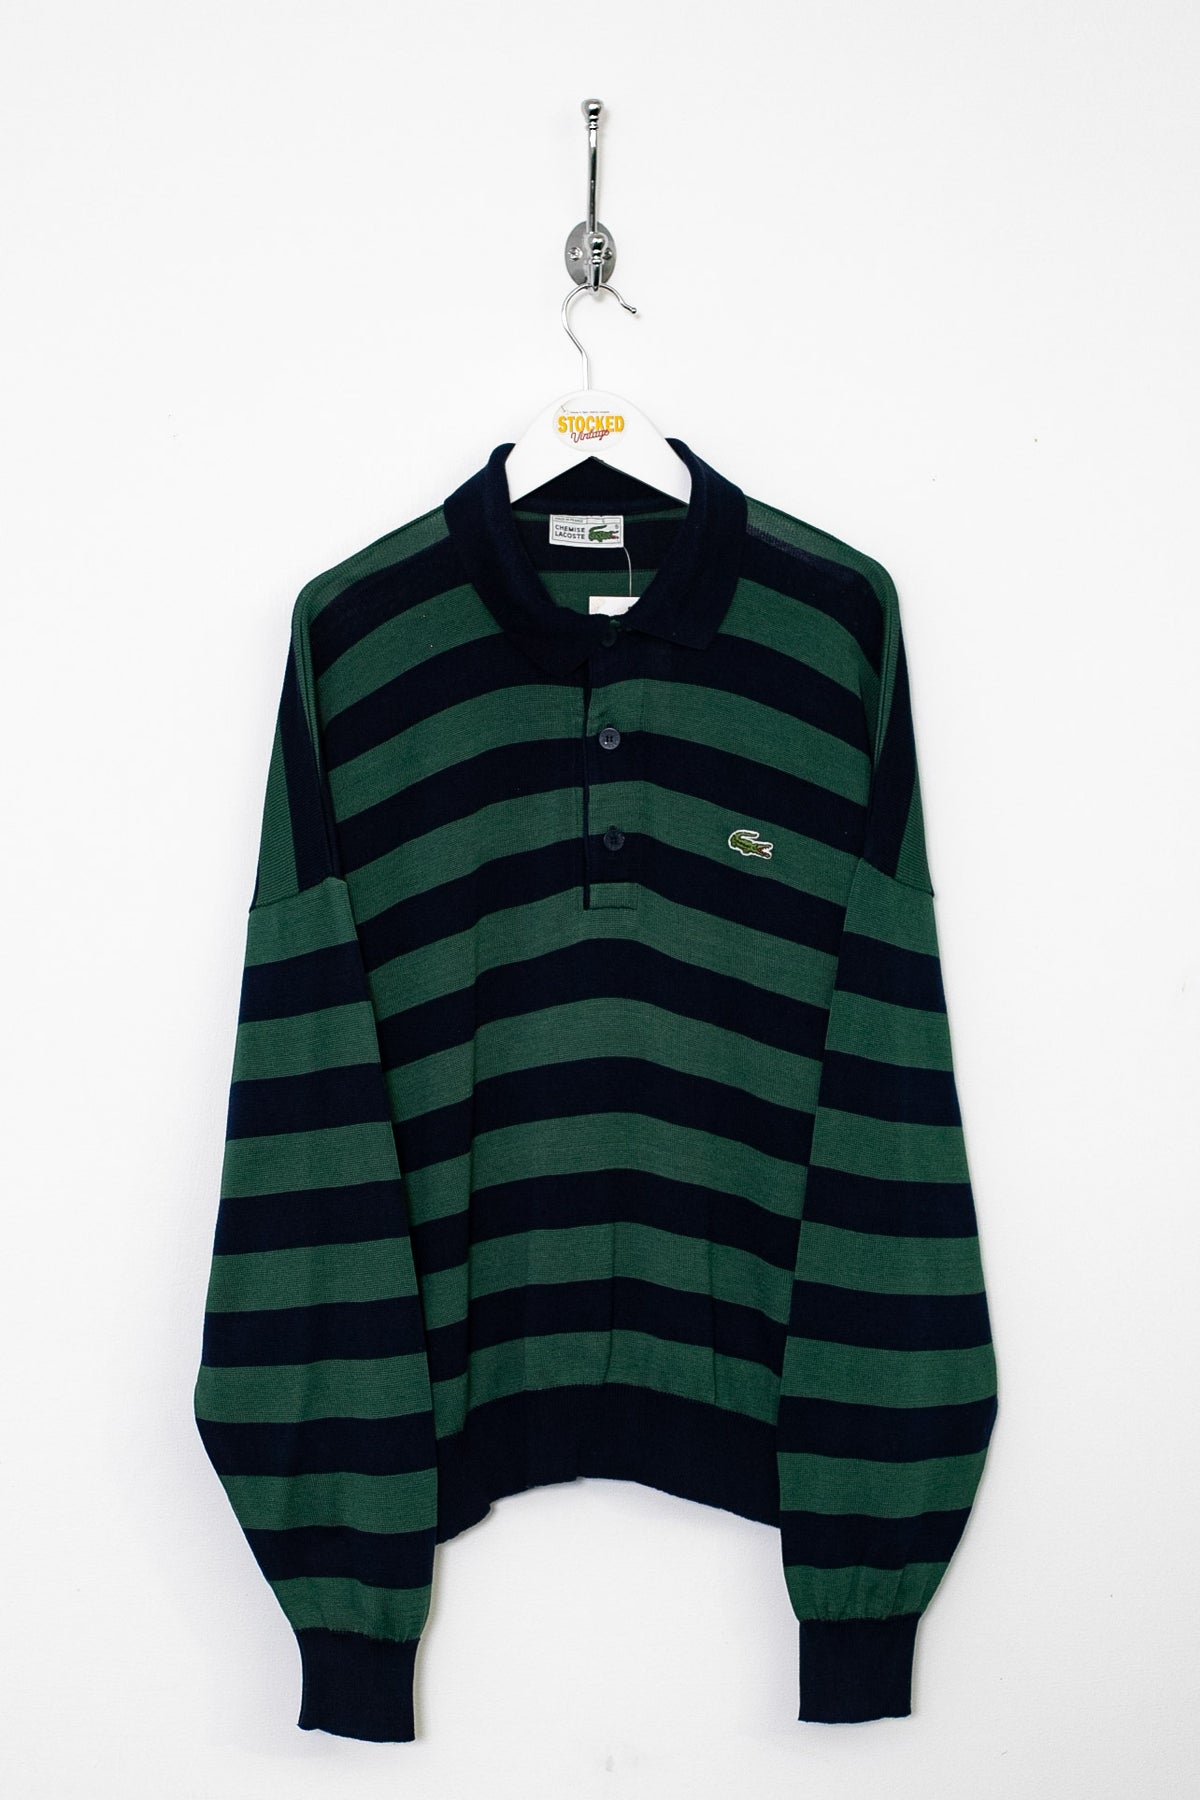 90s Lacoste Collared Jumper (M)